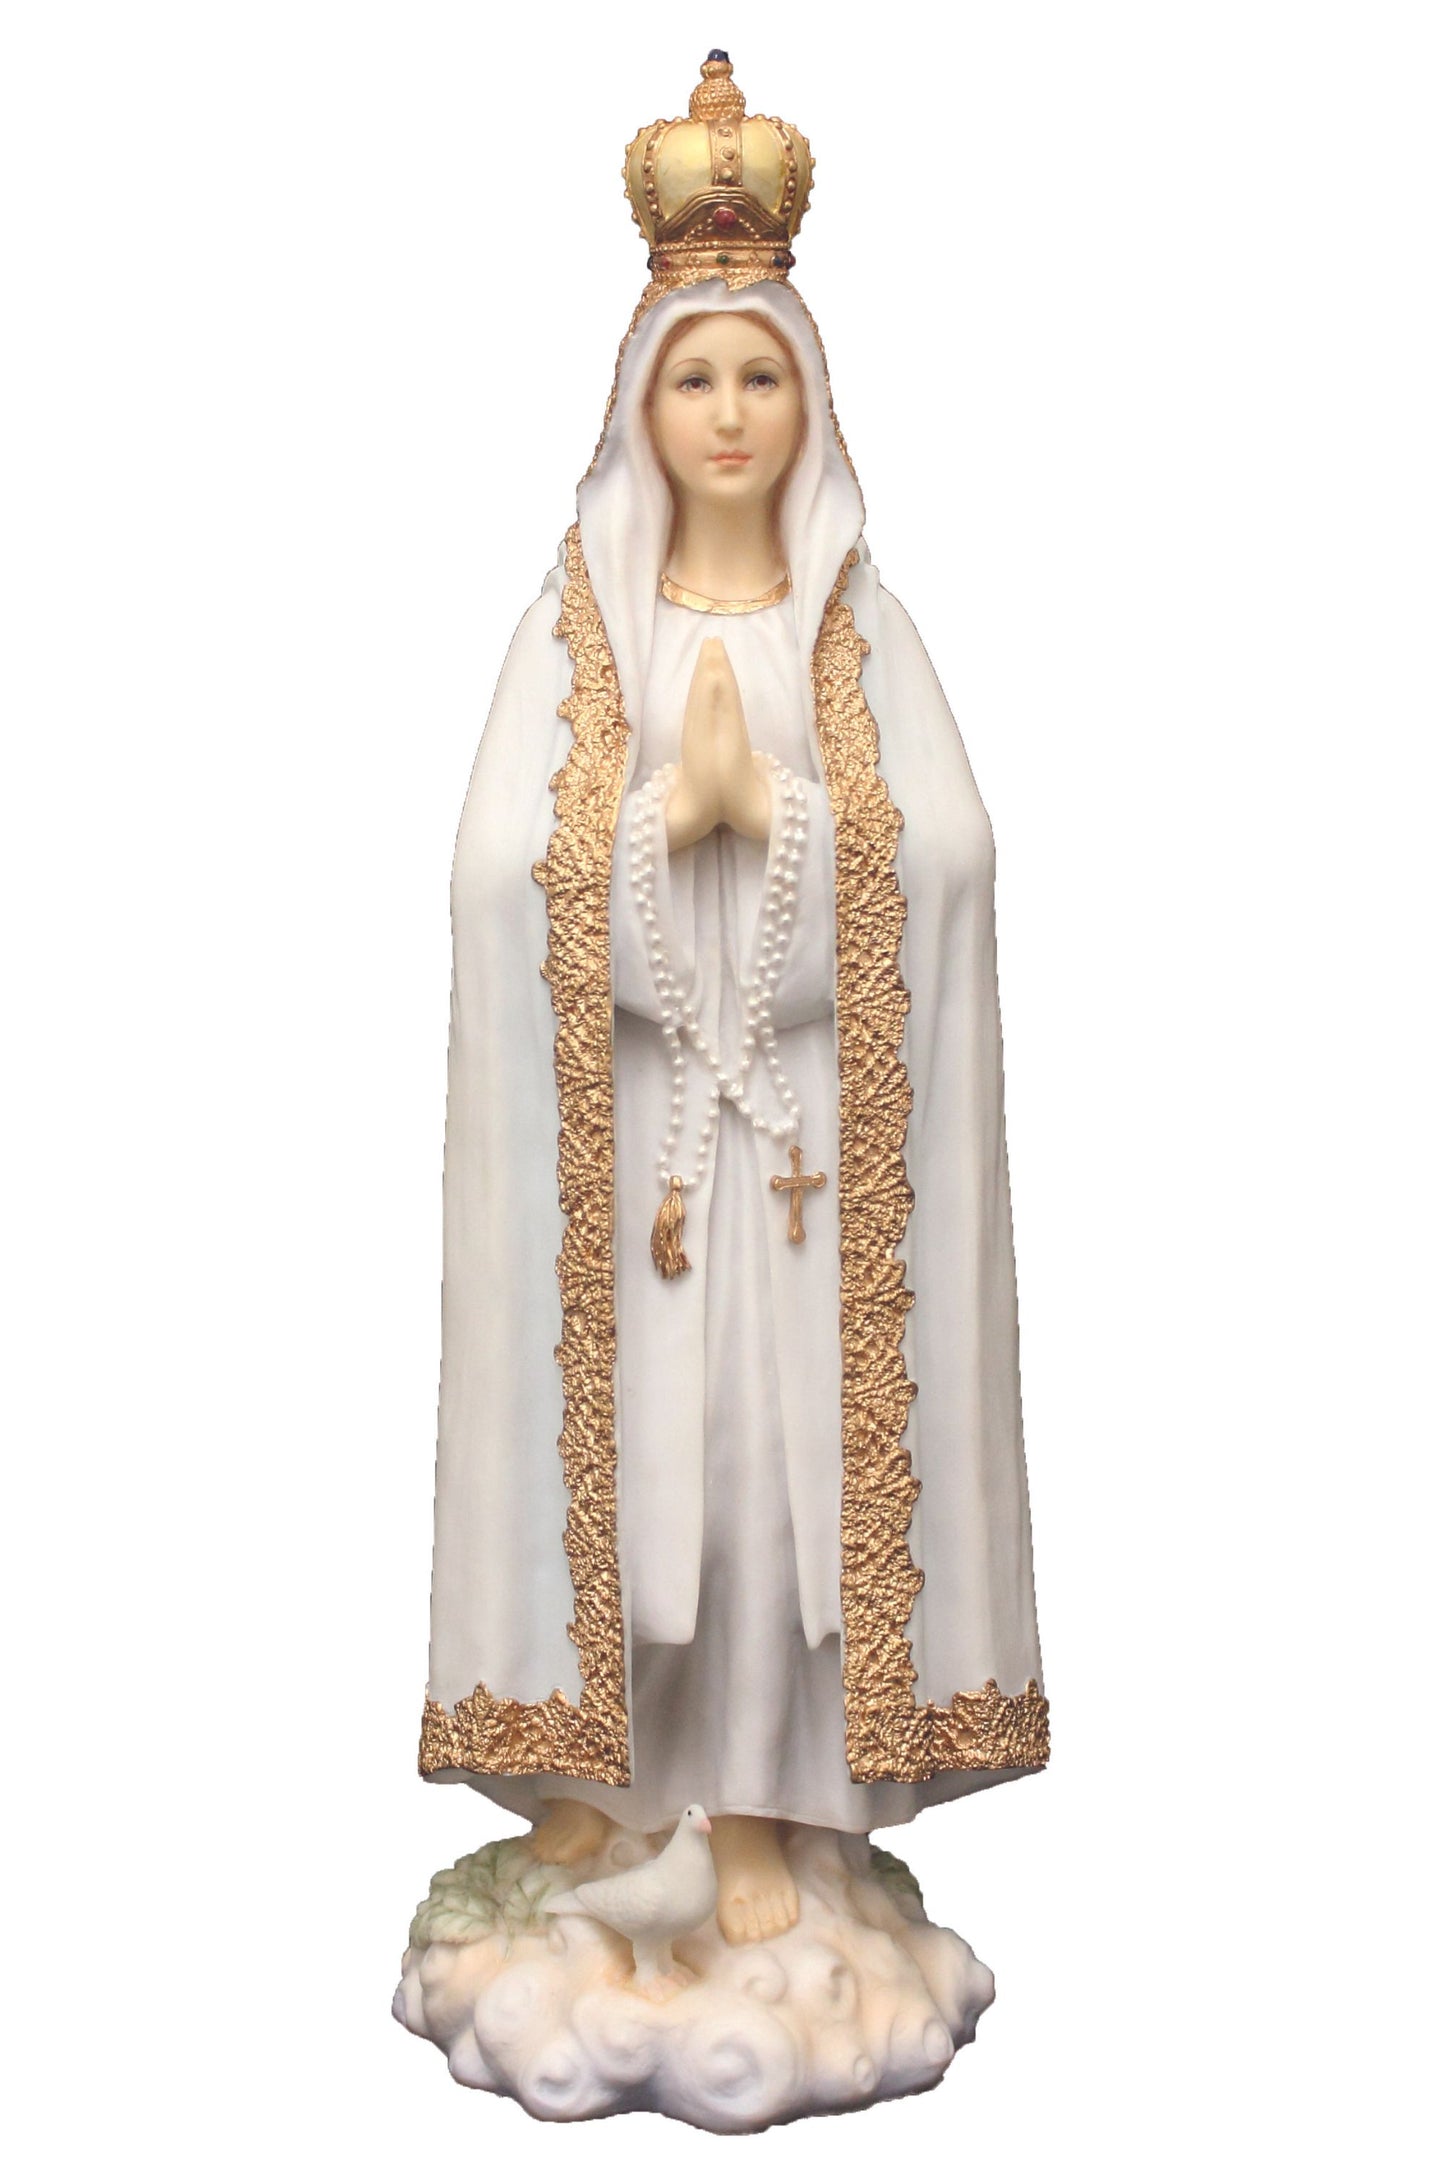 SR-75923-C Our Lady of Fatima in Color 10"